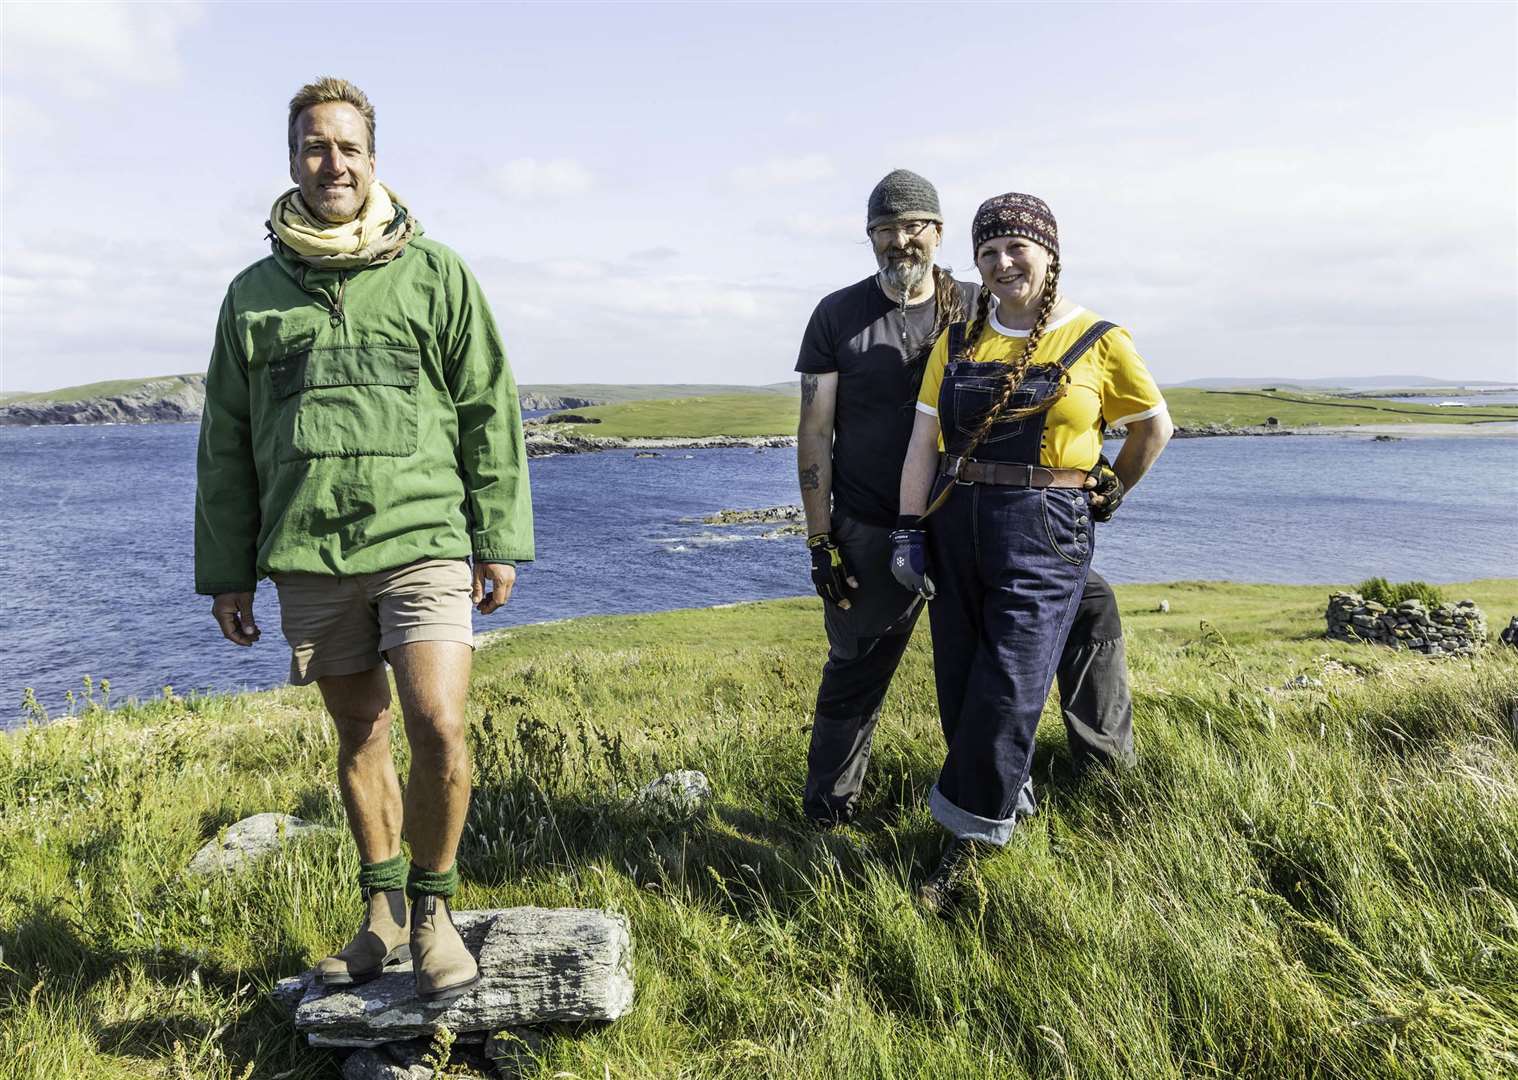 Presenter Ben Fogle with crofters Jason and Helen stood by the coast near their new home. Photo: Renegade Pictures (UK) Ltd